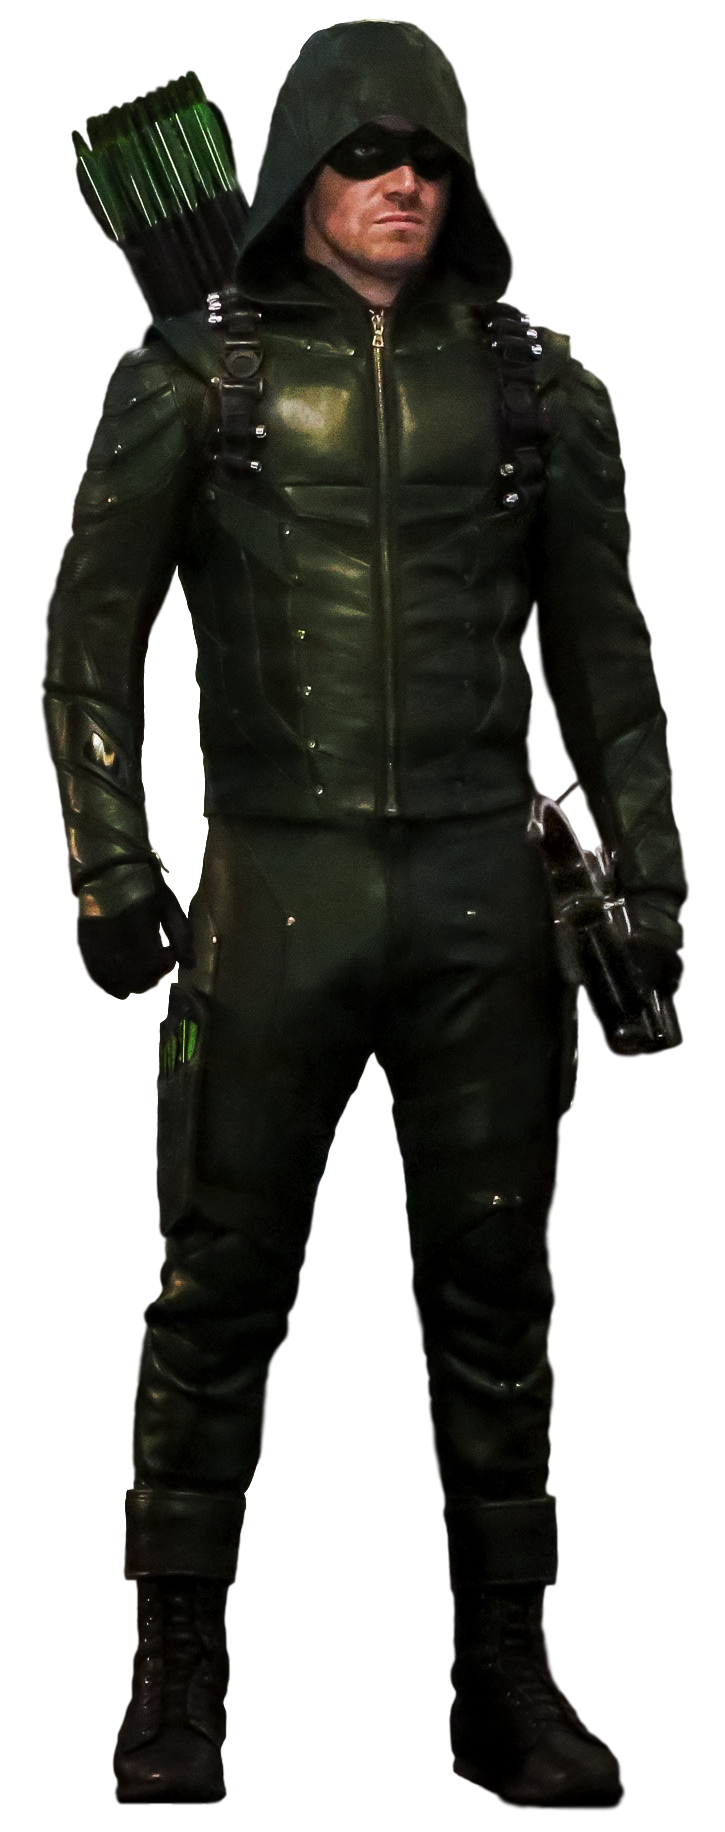 green_arrow__season_5____transparent_background__by_camo_flauge-daosprf.png